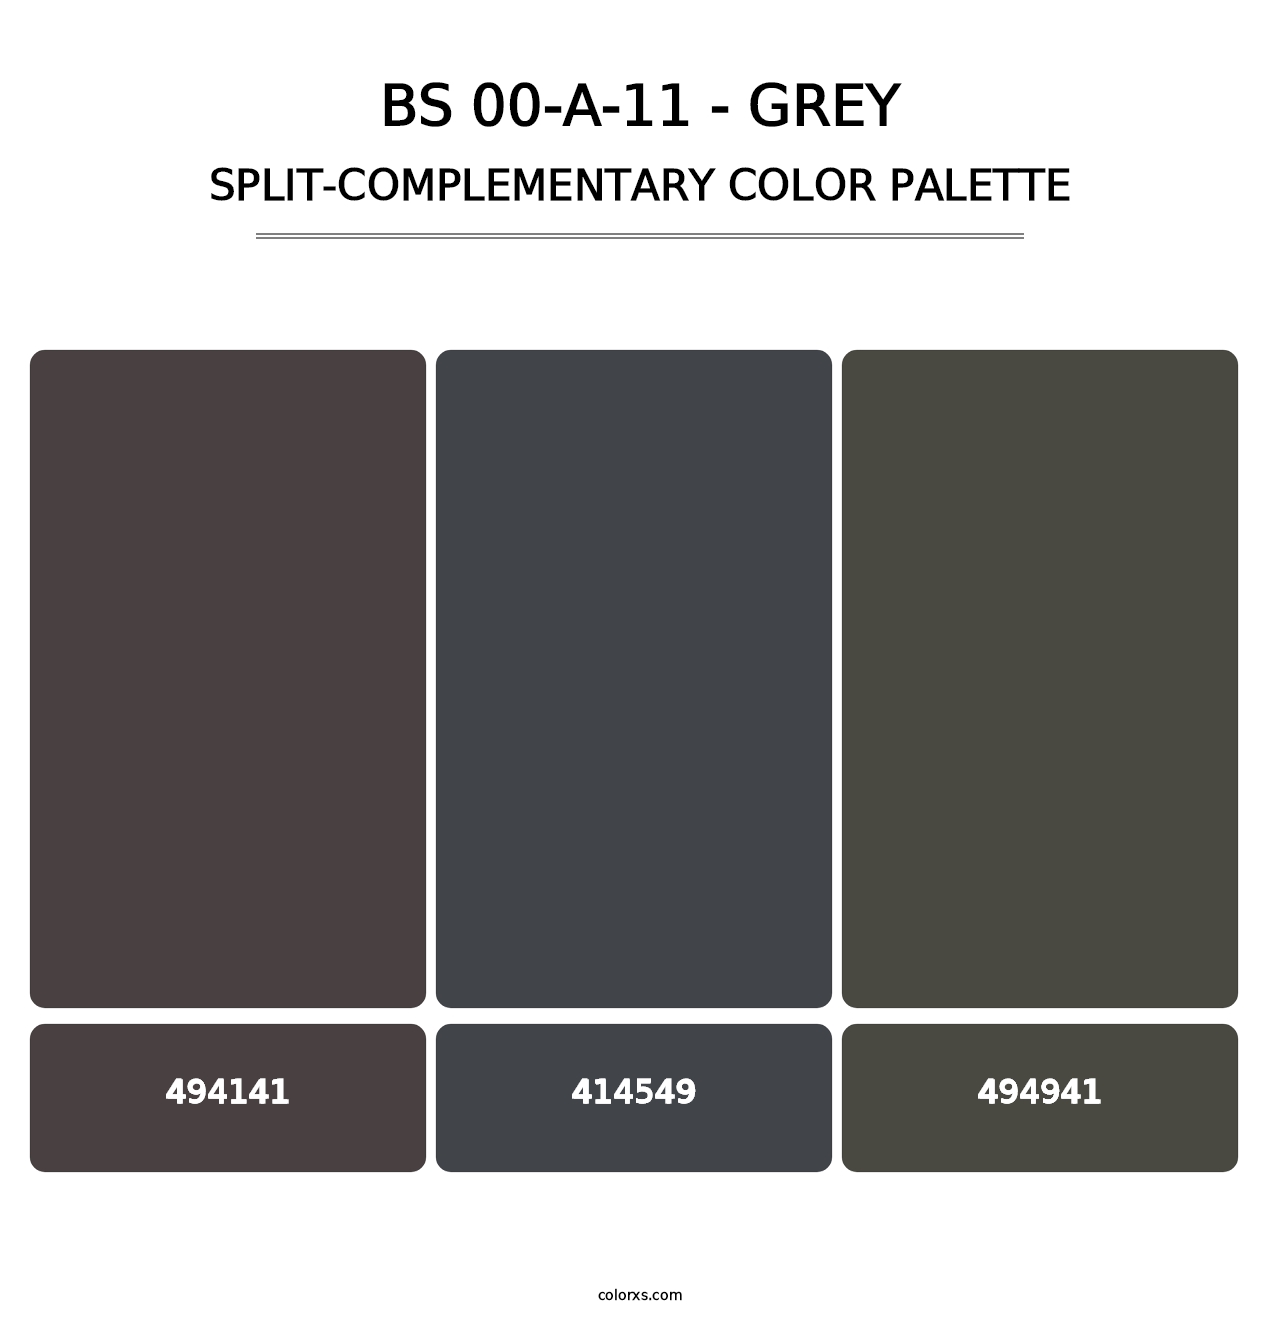 BS 00-A-11 - Grey - Split-Complementary Color Palette